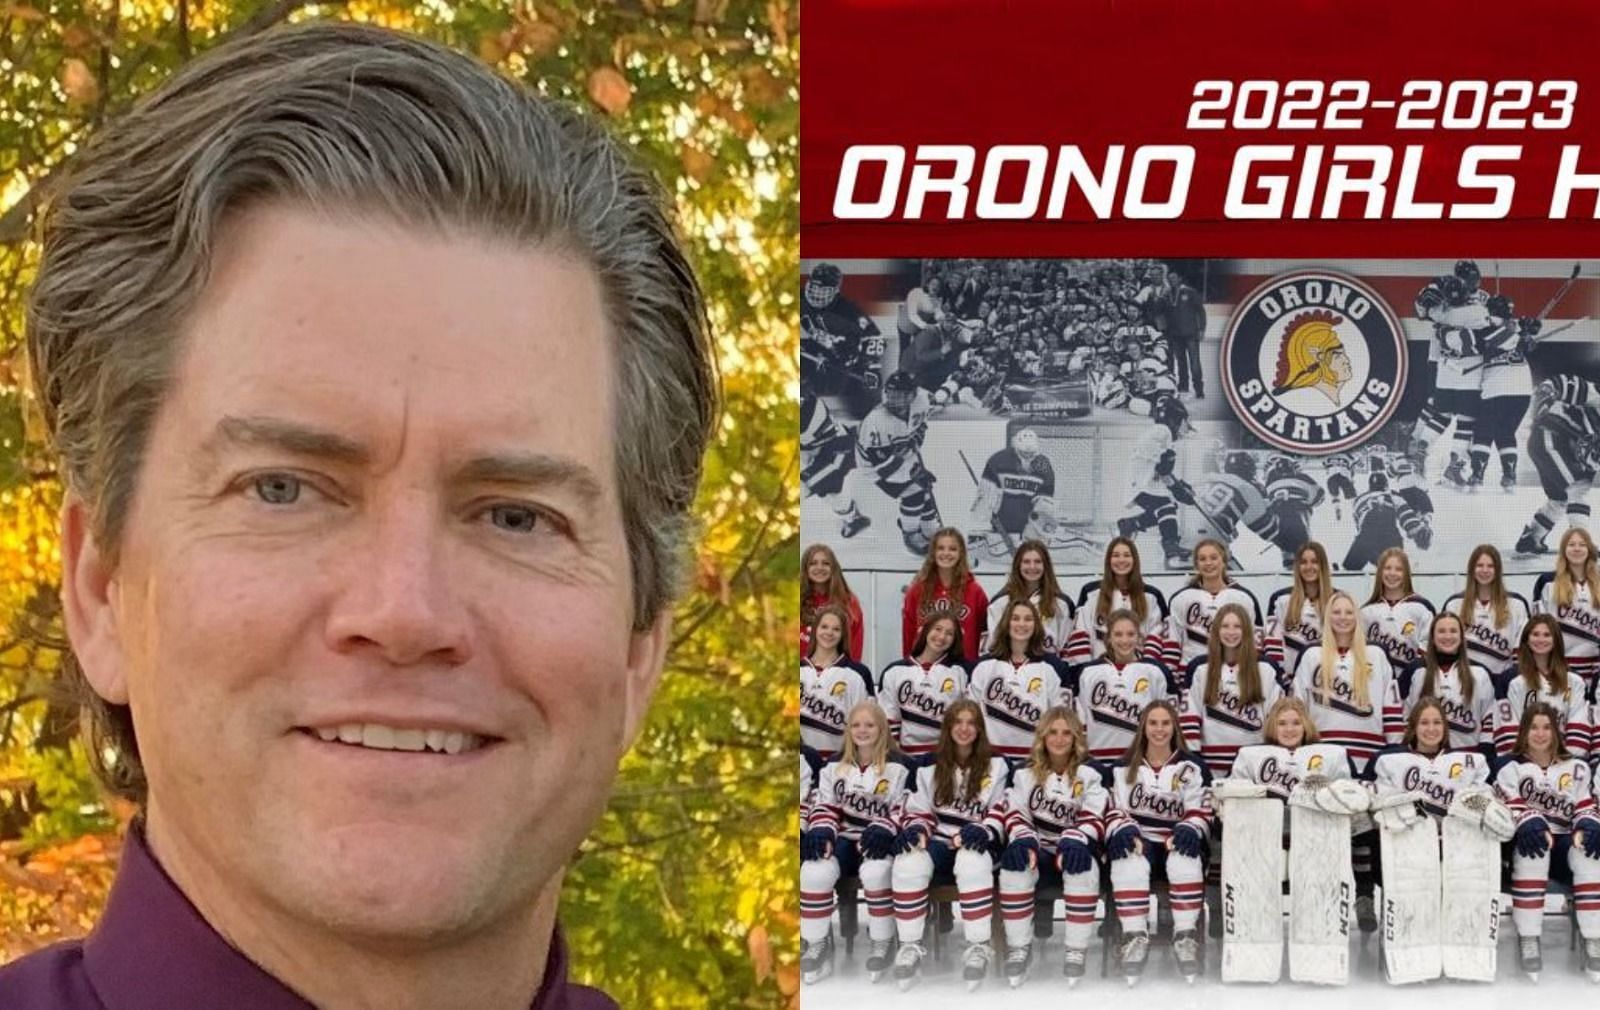 Larry Olimb left his head coach position after high school hockey parent's harsh email - "You just don't have it"